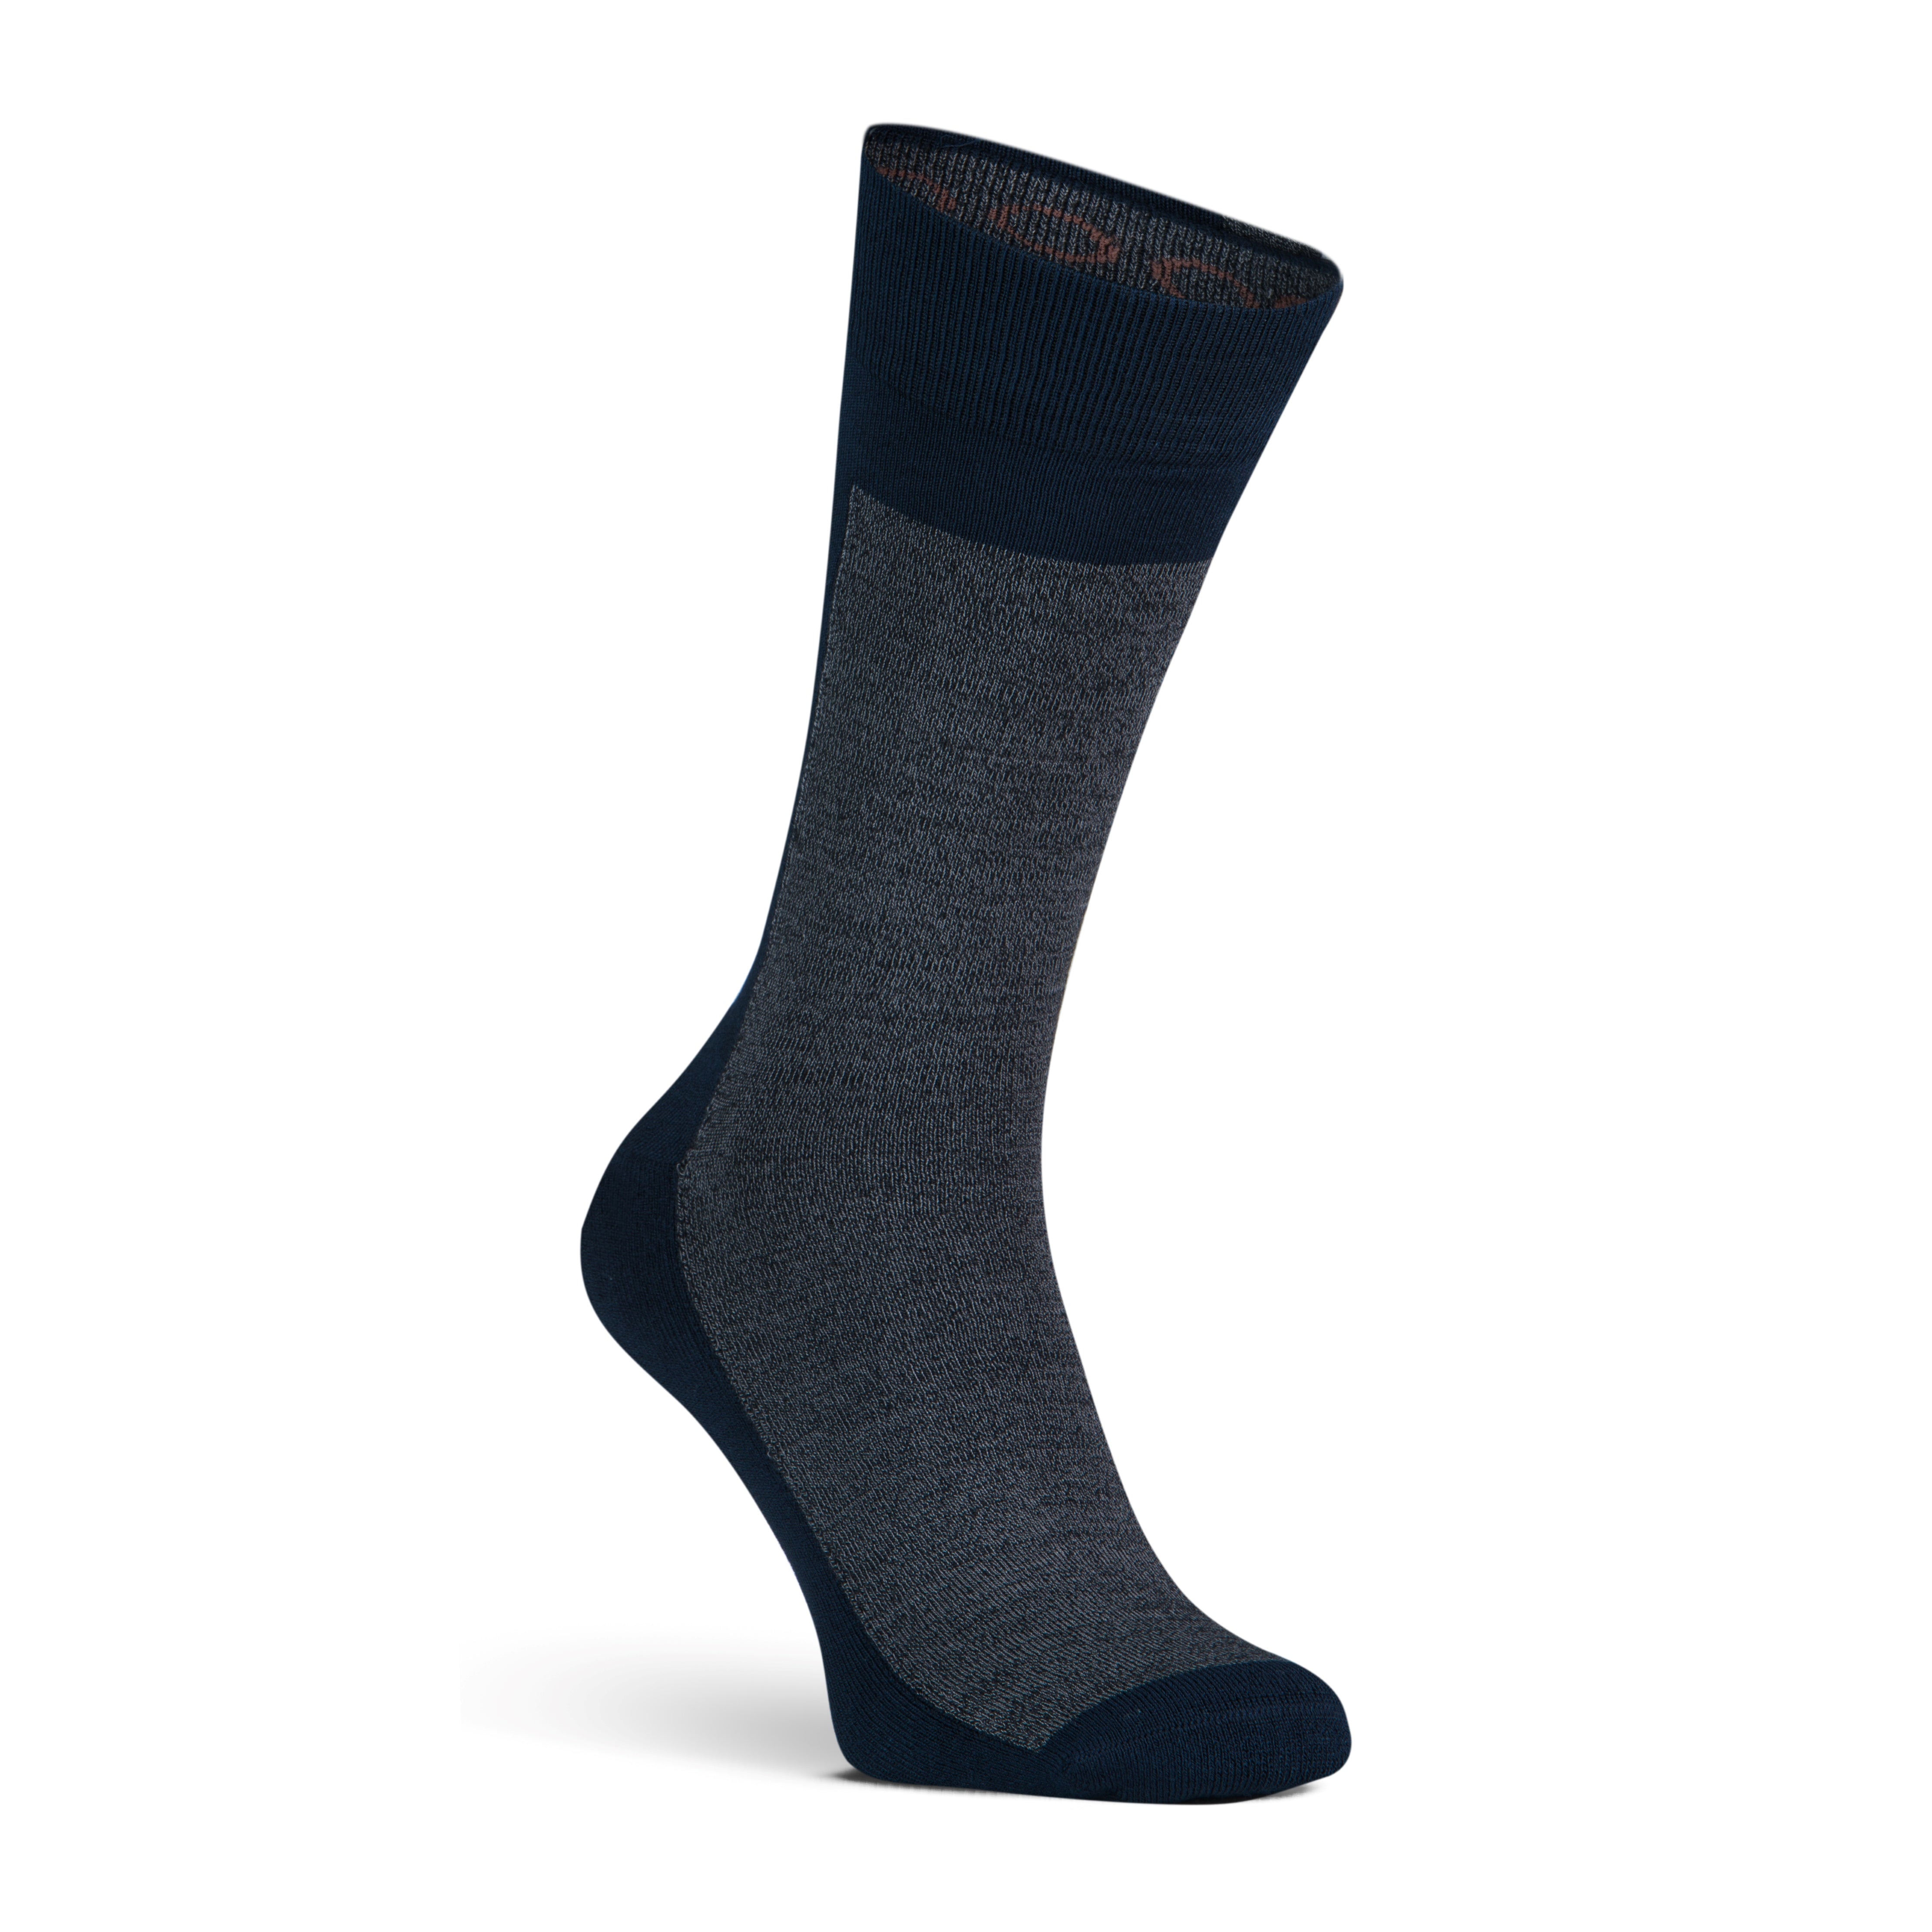 New York chaussettes pour hommes Anthracite